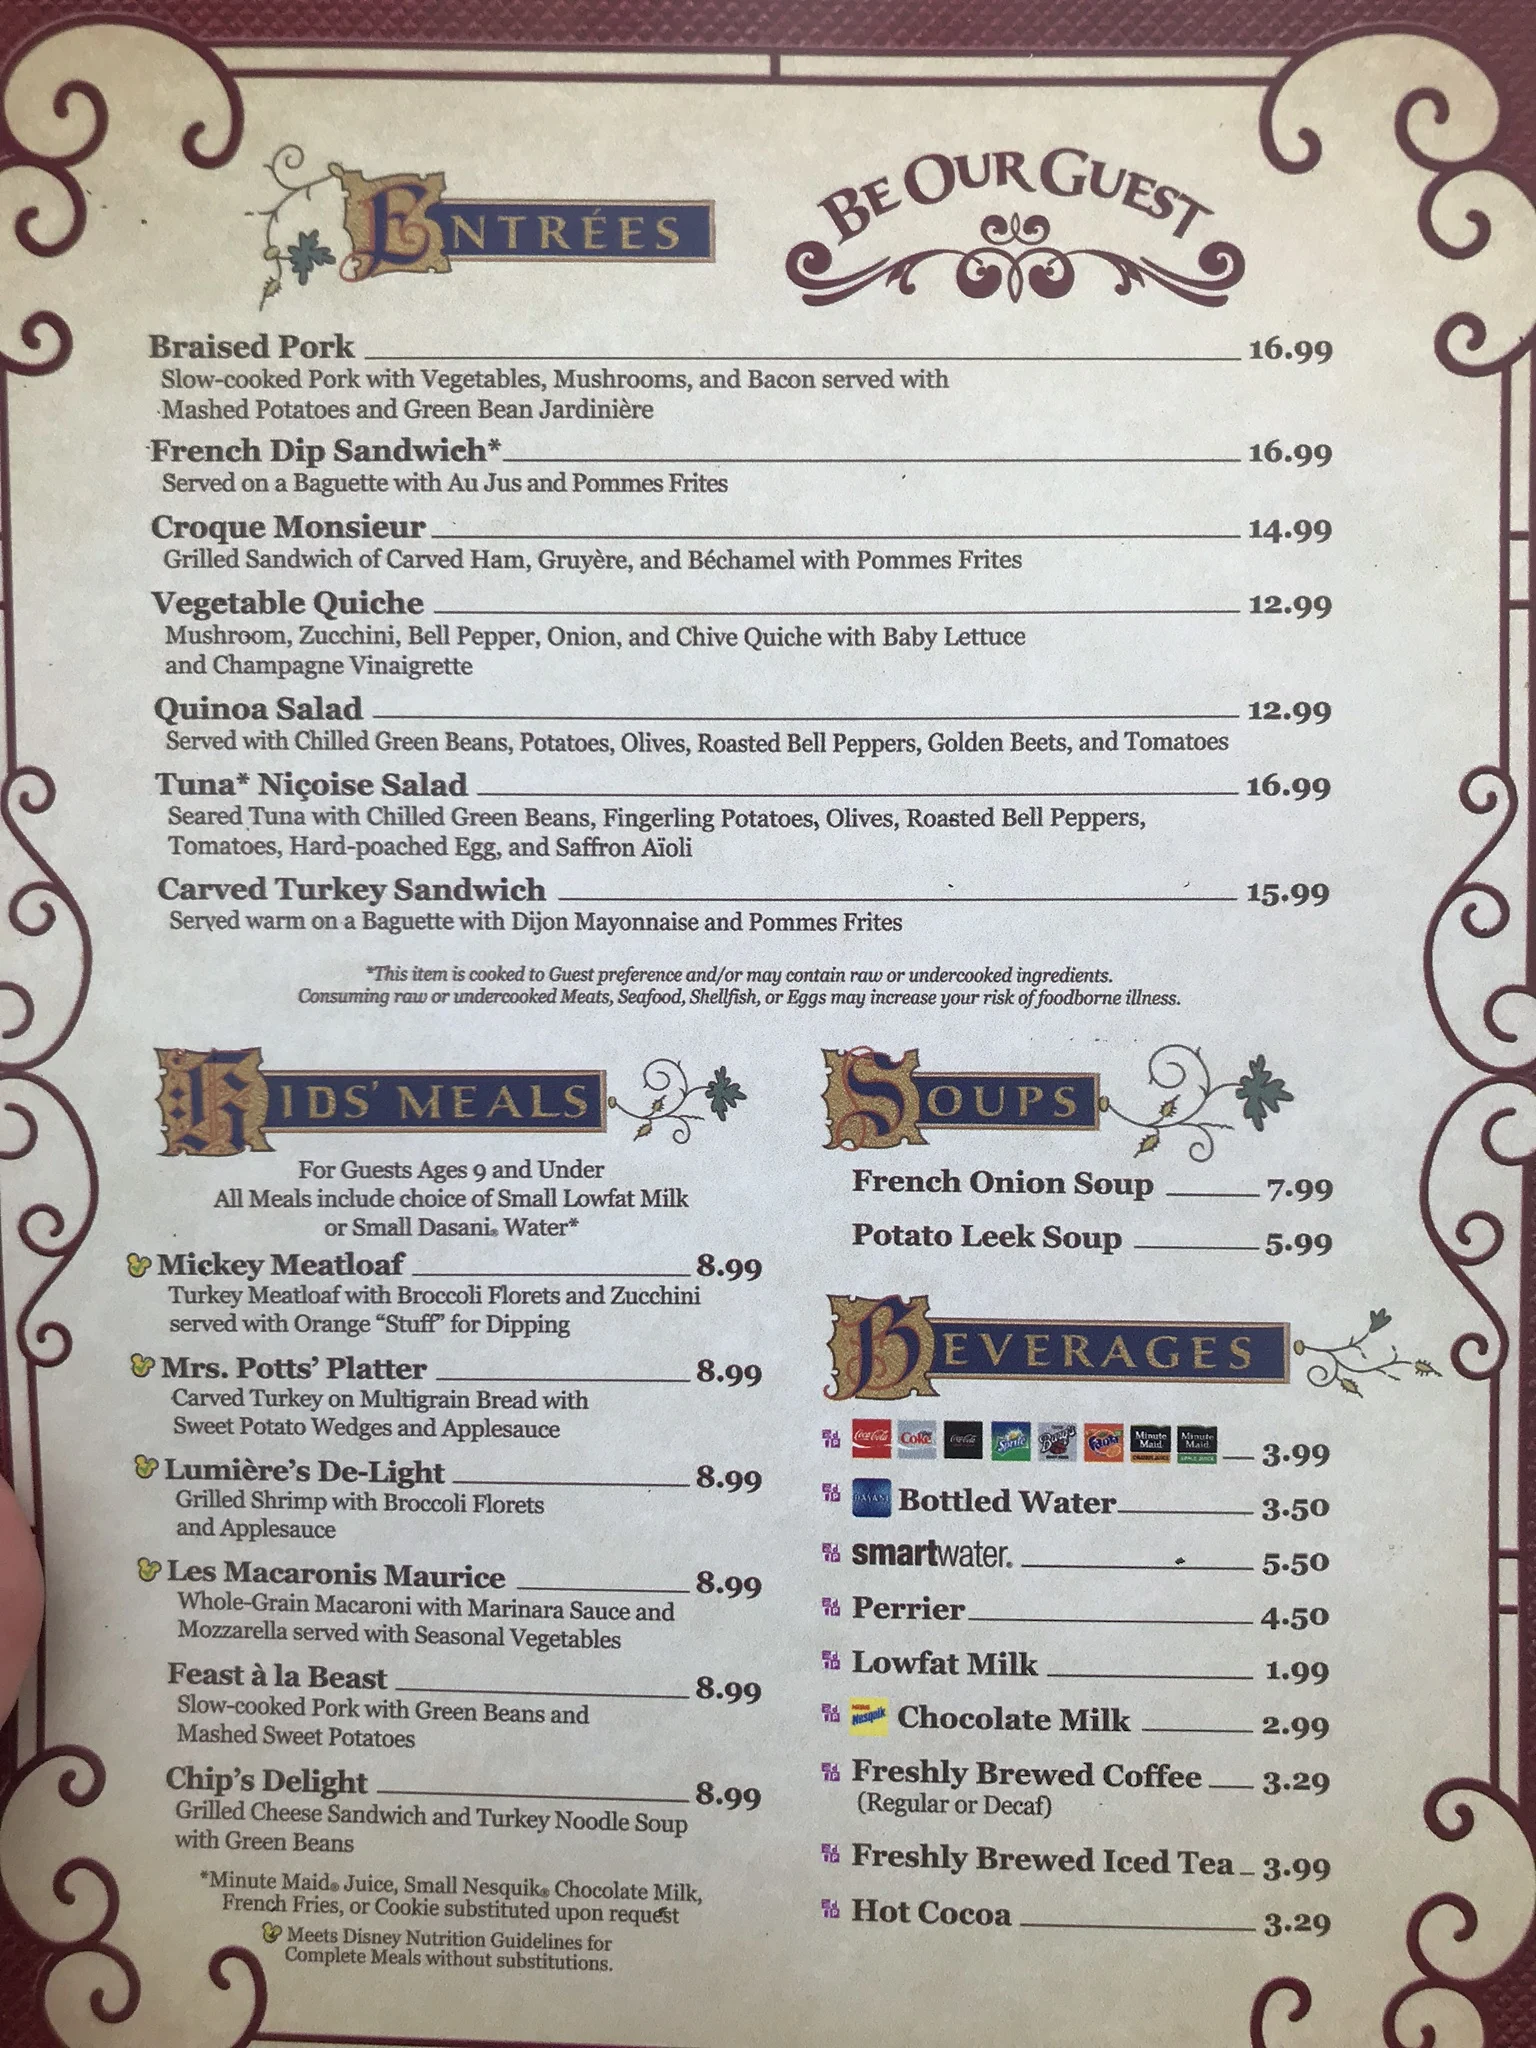 lunch menu at be our guest